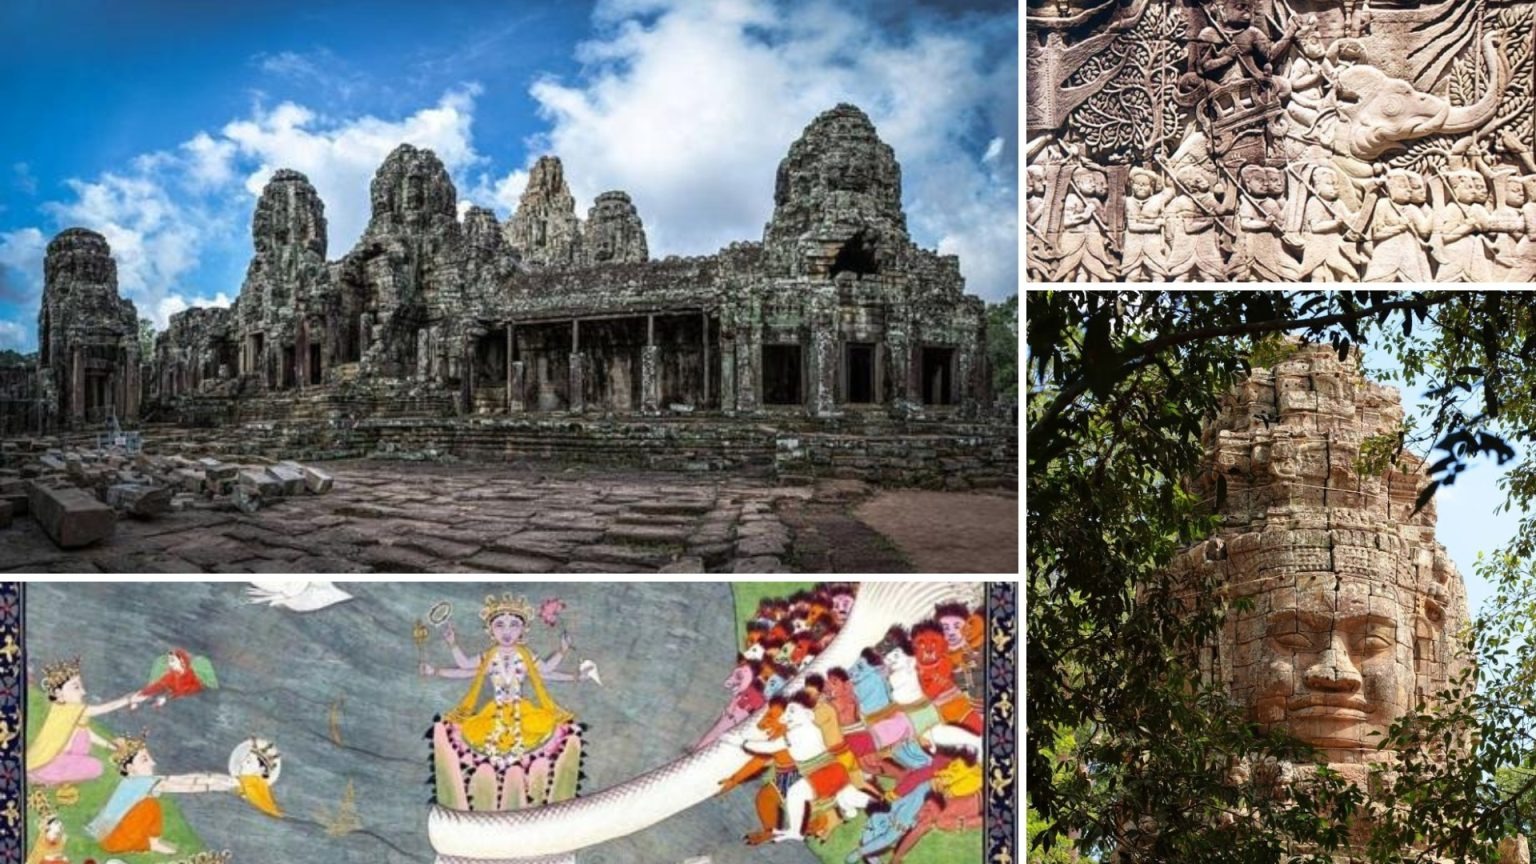 Built by Kings, the Ancient Bayon Temple of Cambodia Mixes Spirituality, History and Symbolism